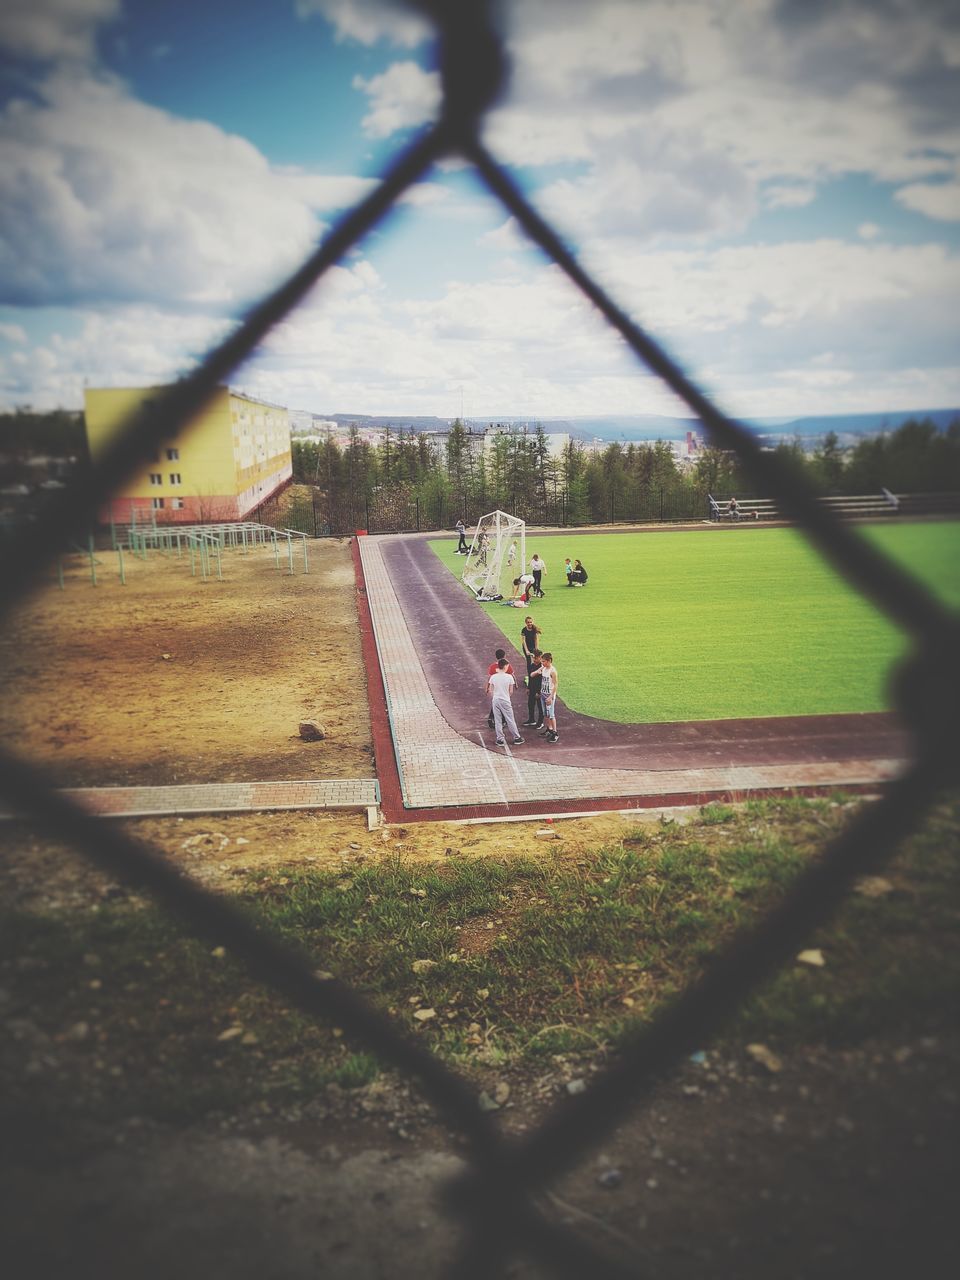 SCENIC VIEW OF FIELD SEEN THROUGH FENCE